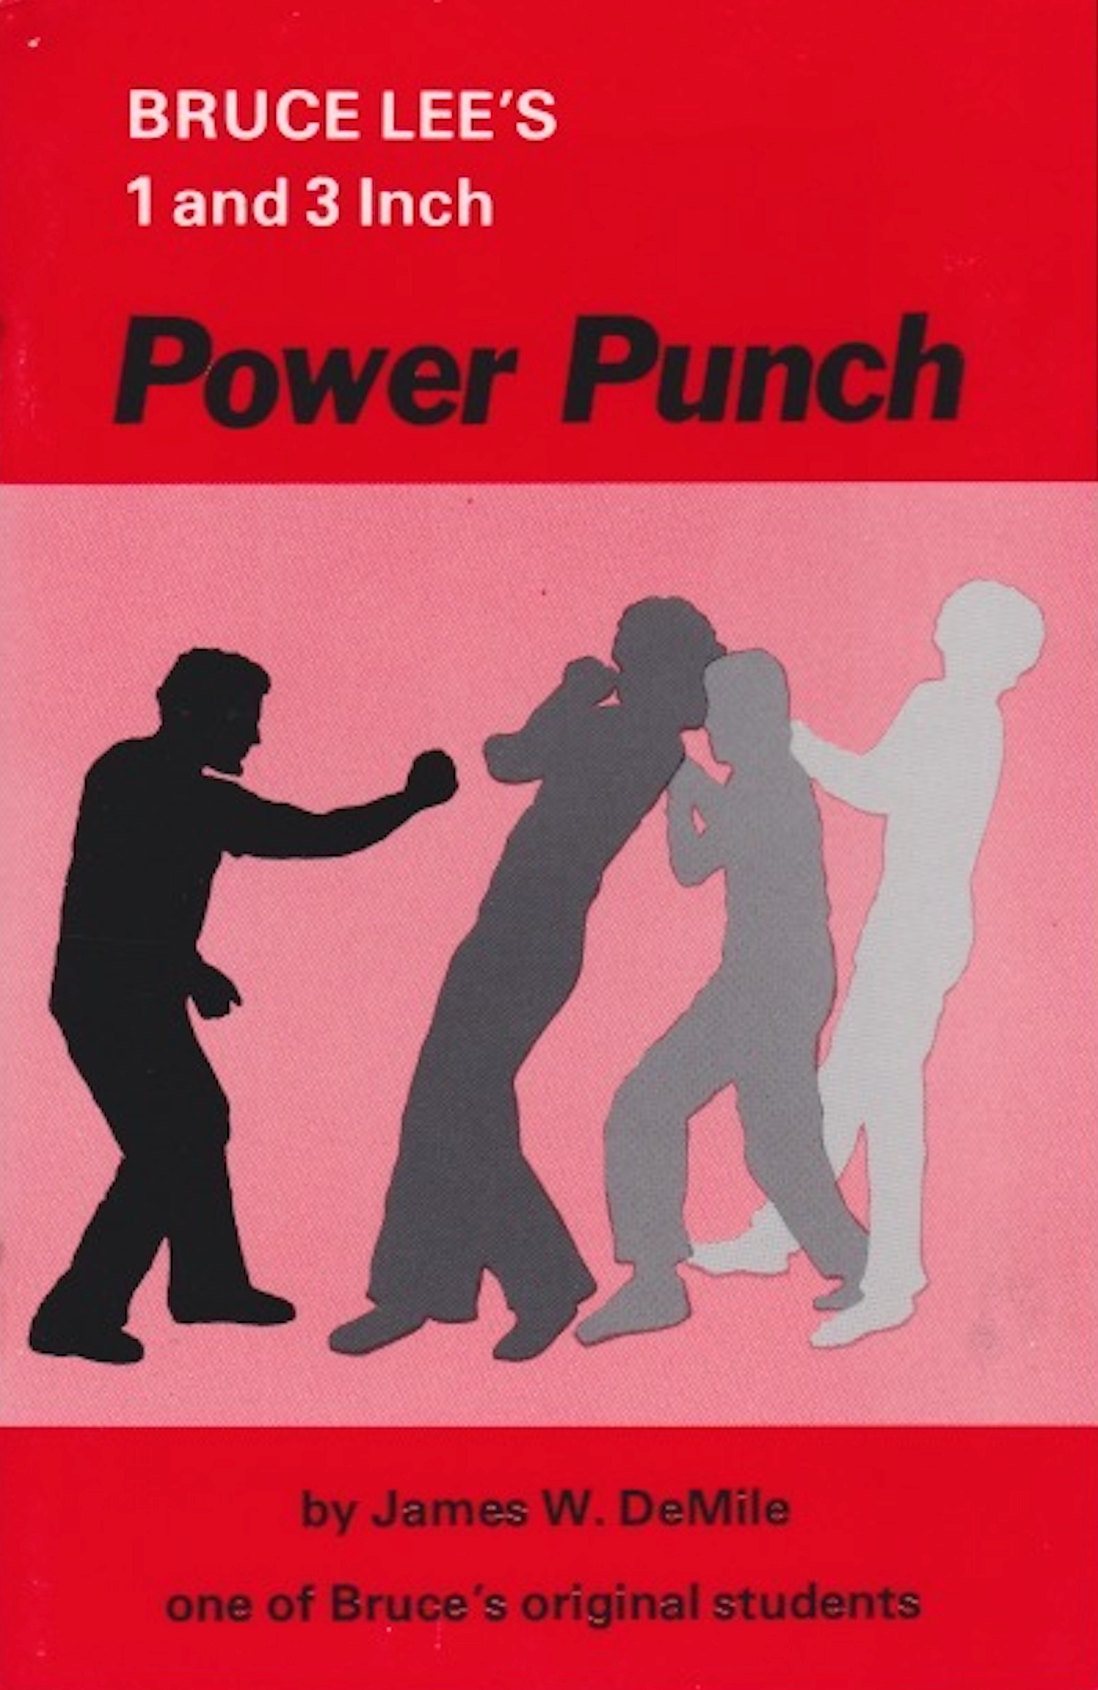 Bruce Lee's 1 & 3 Inch Power Punch Book by James DeMile